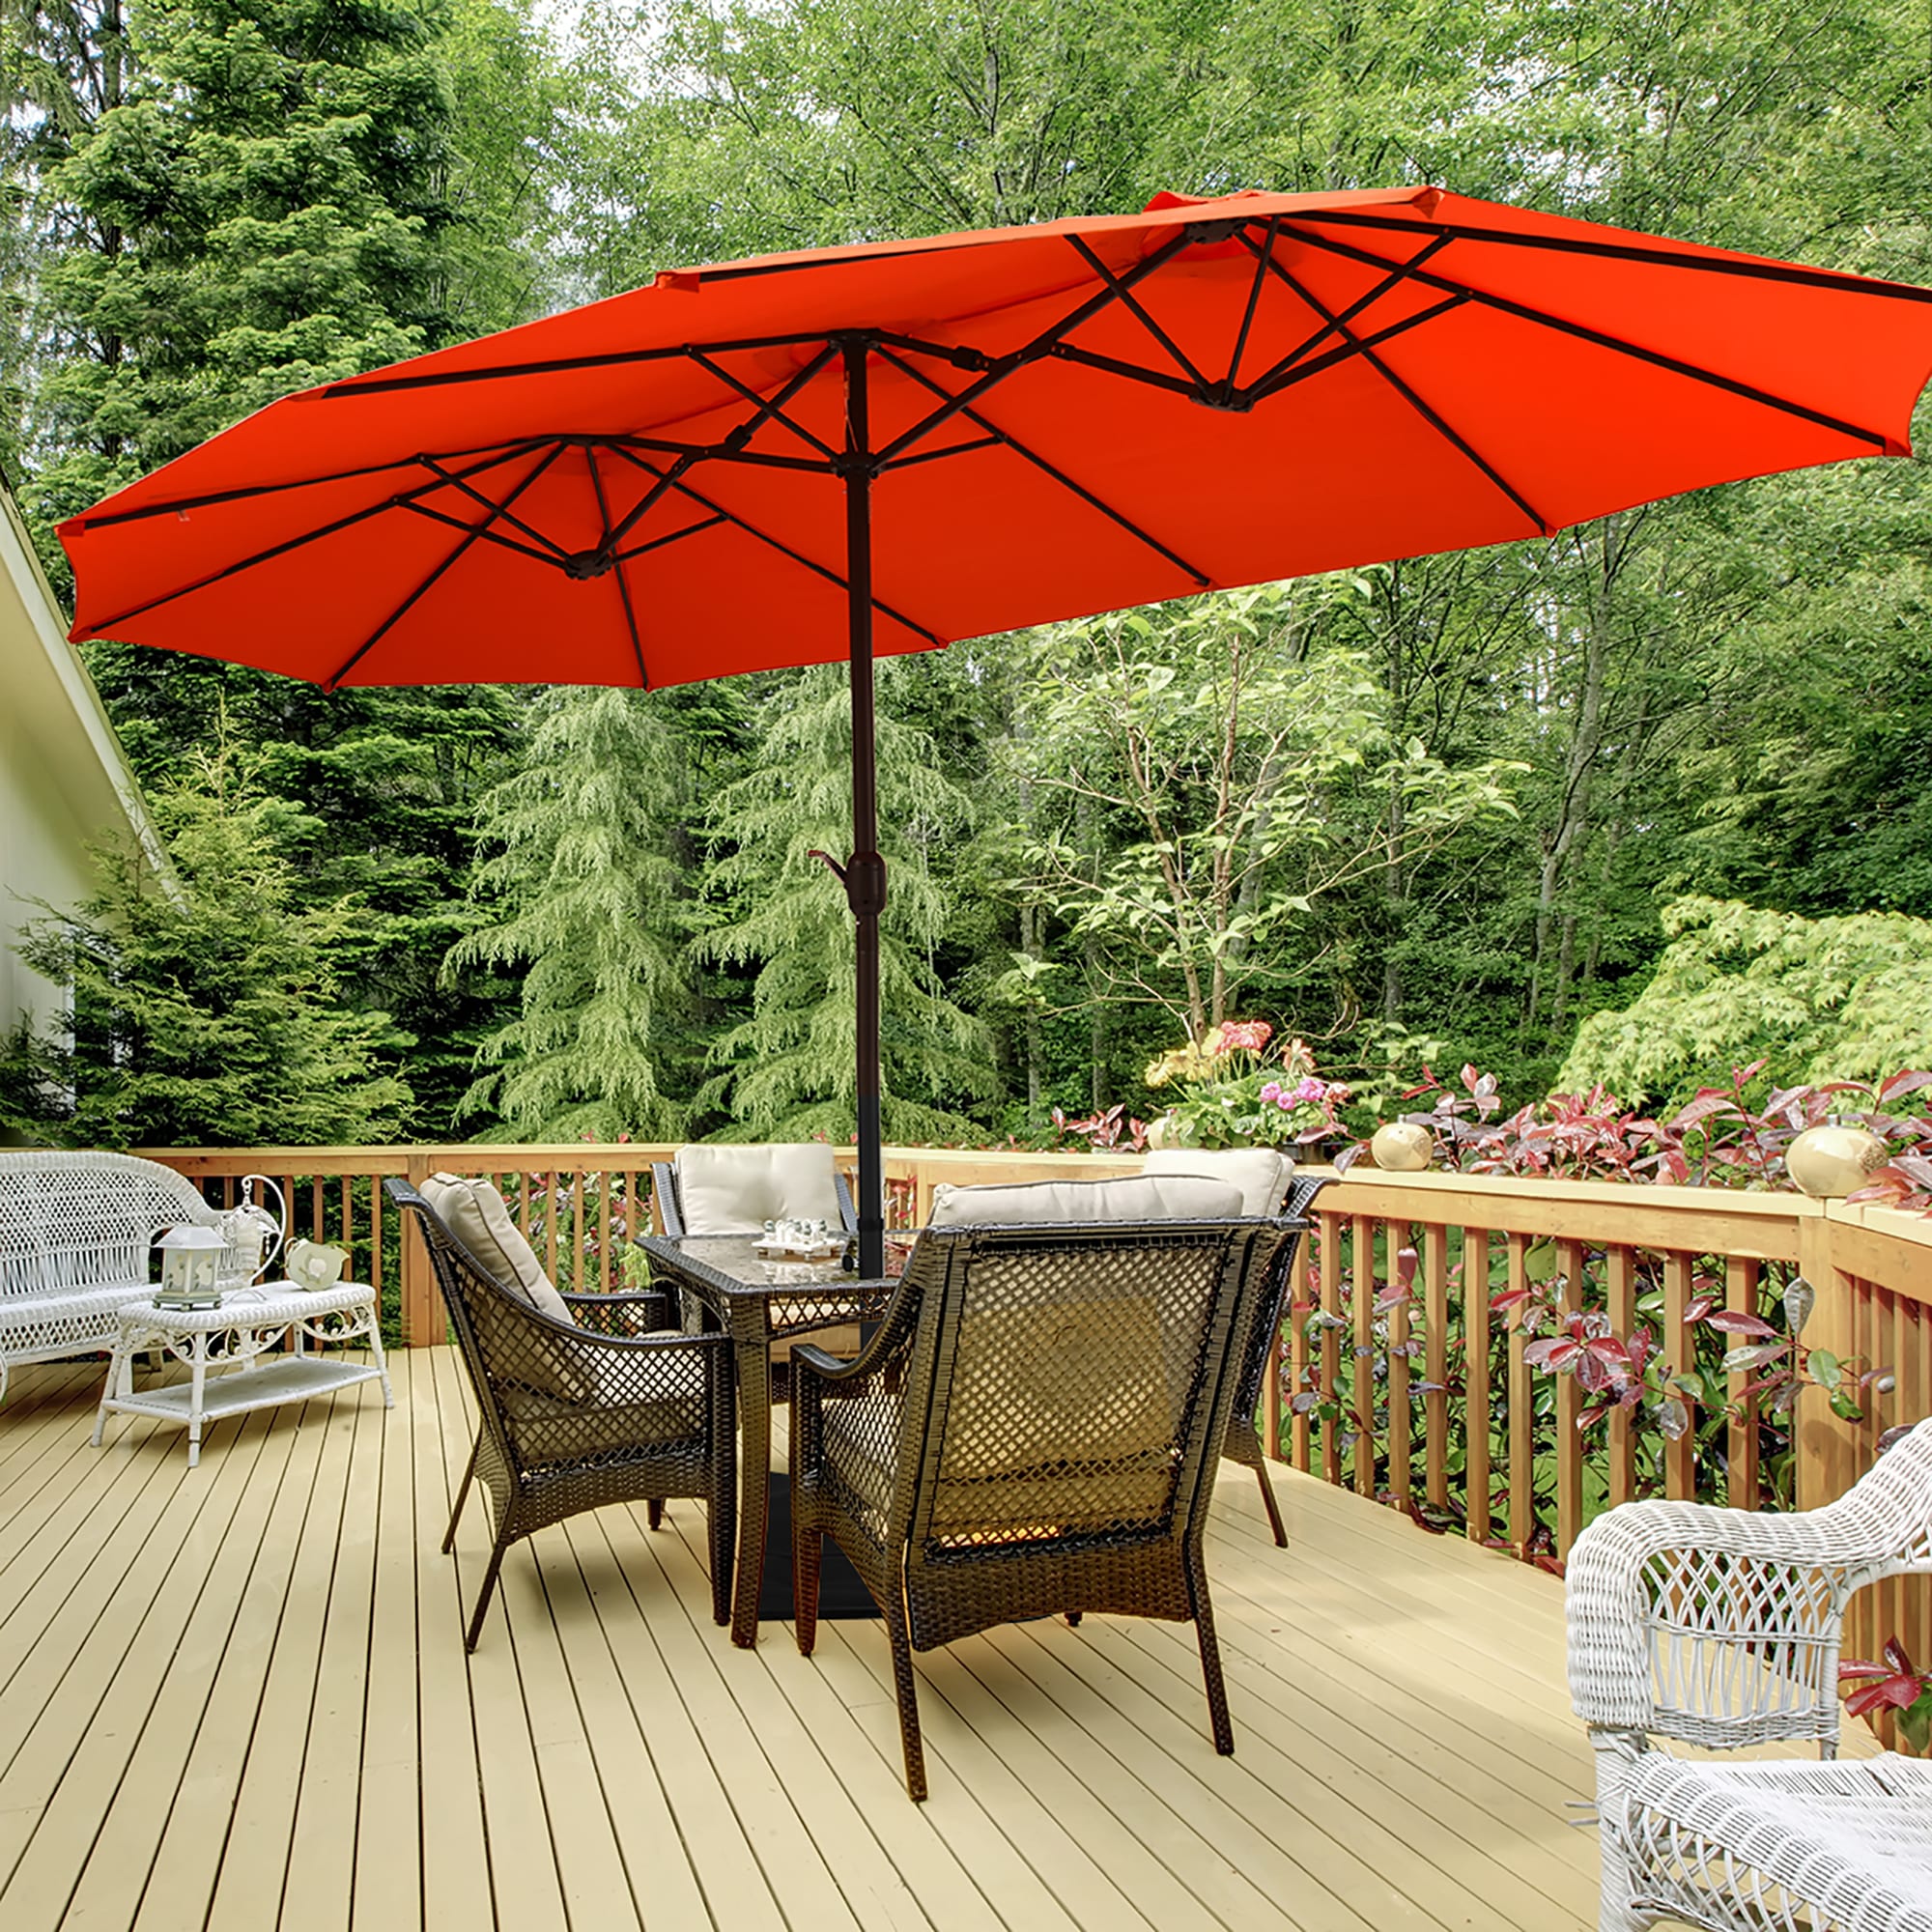 Details about   15' Ft Hanging Umbrella Patio Sun Shade Offset Outdoor UV Resistant w/ Base USA 